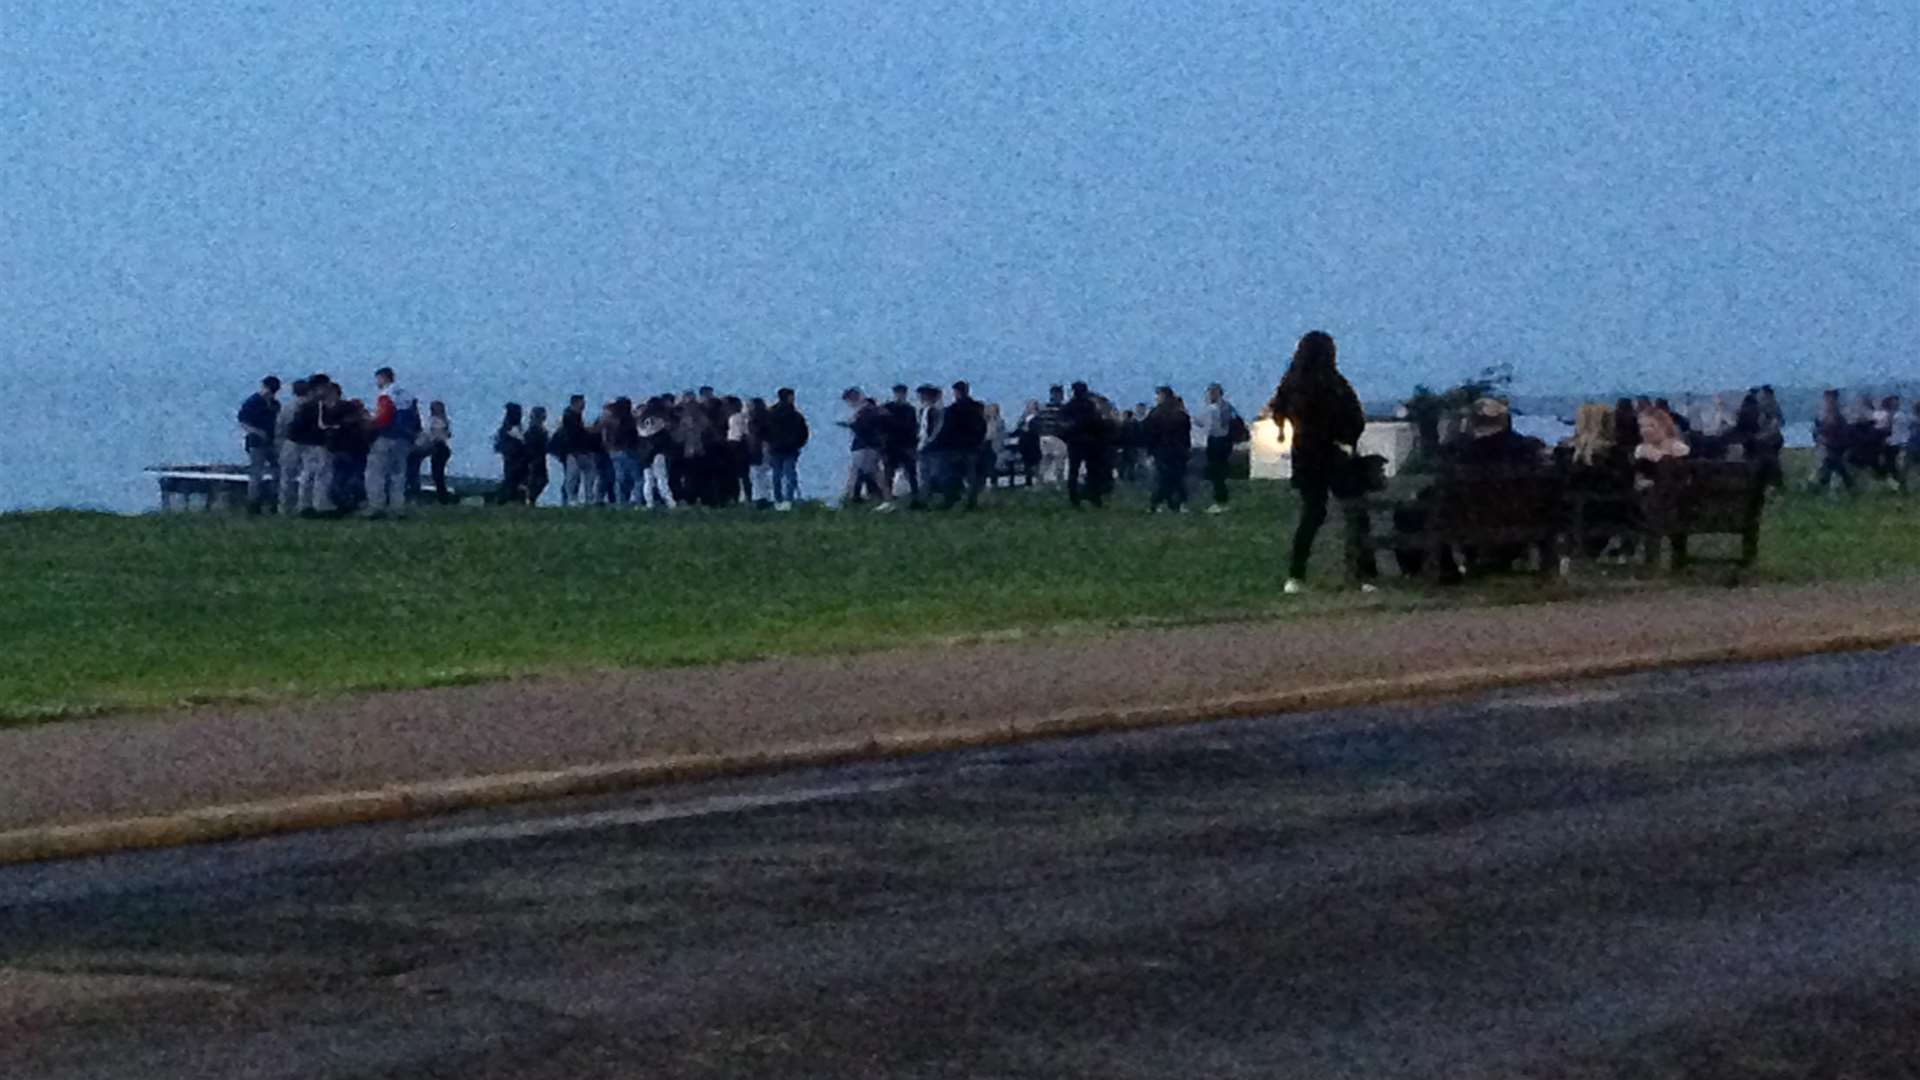 The group gathers on Tankerton Slopes